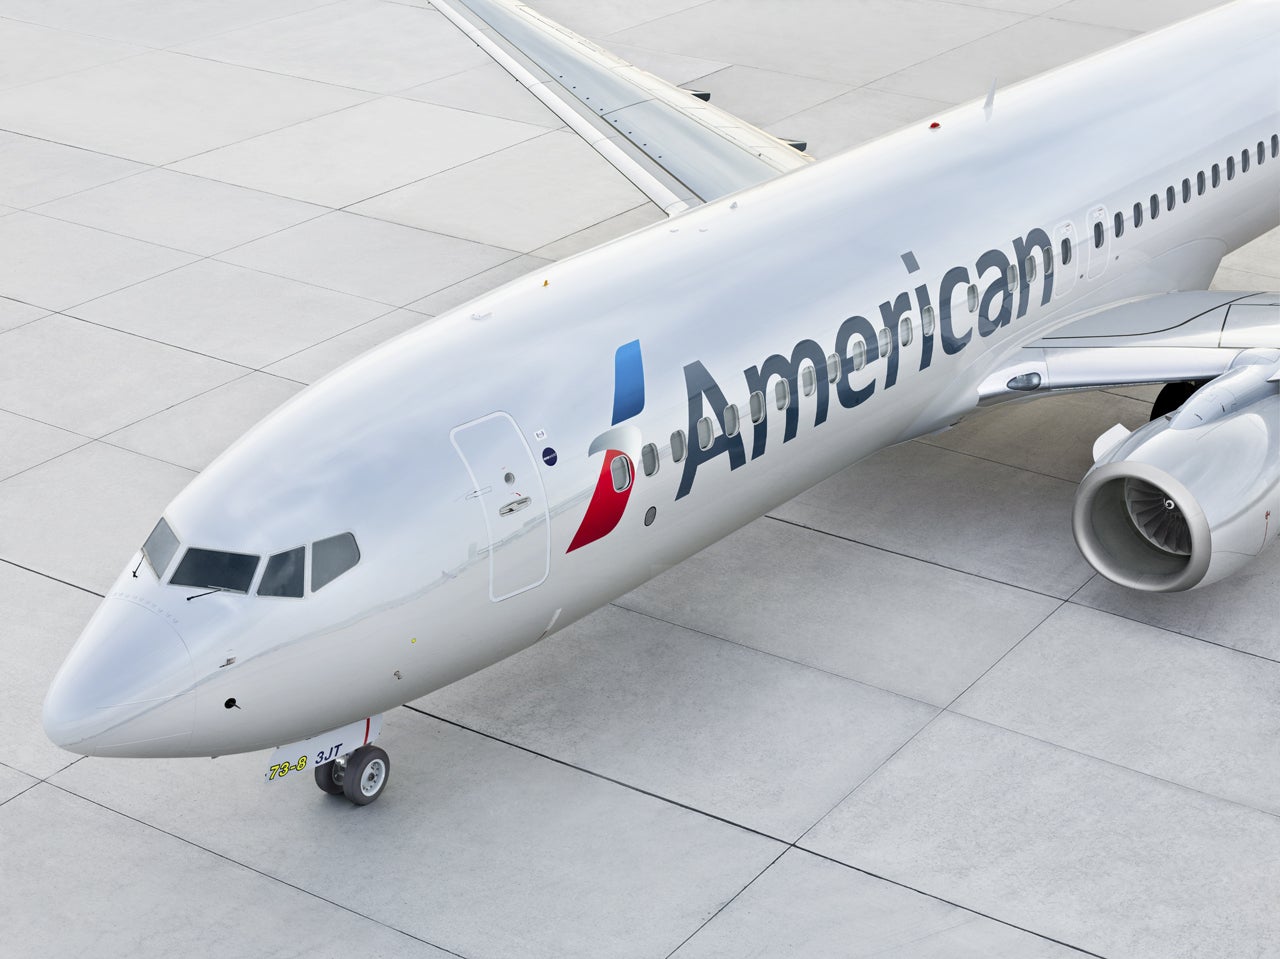 American Airlines Boeing 737-800 with the updated flight symbol seen in the current livery.